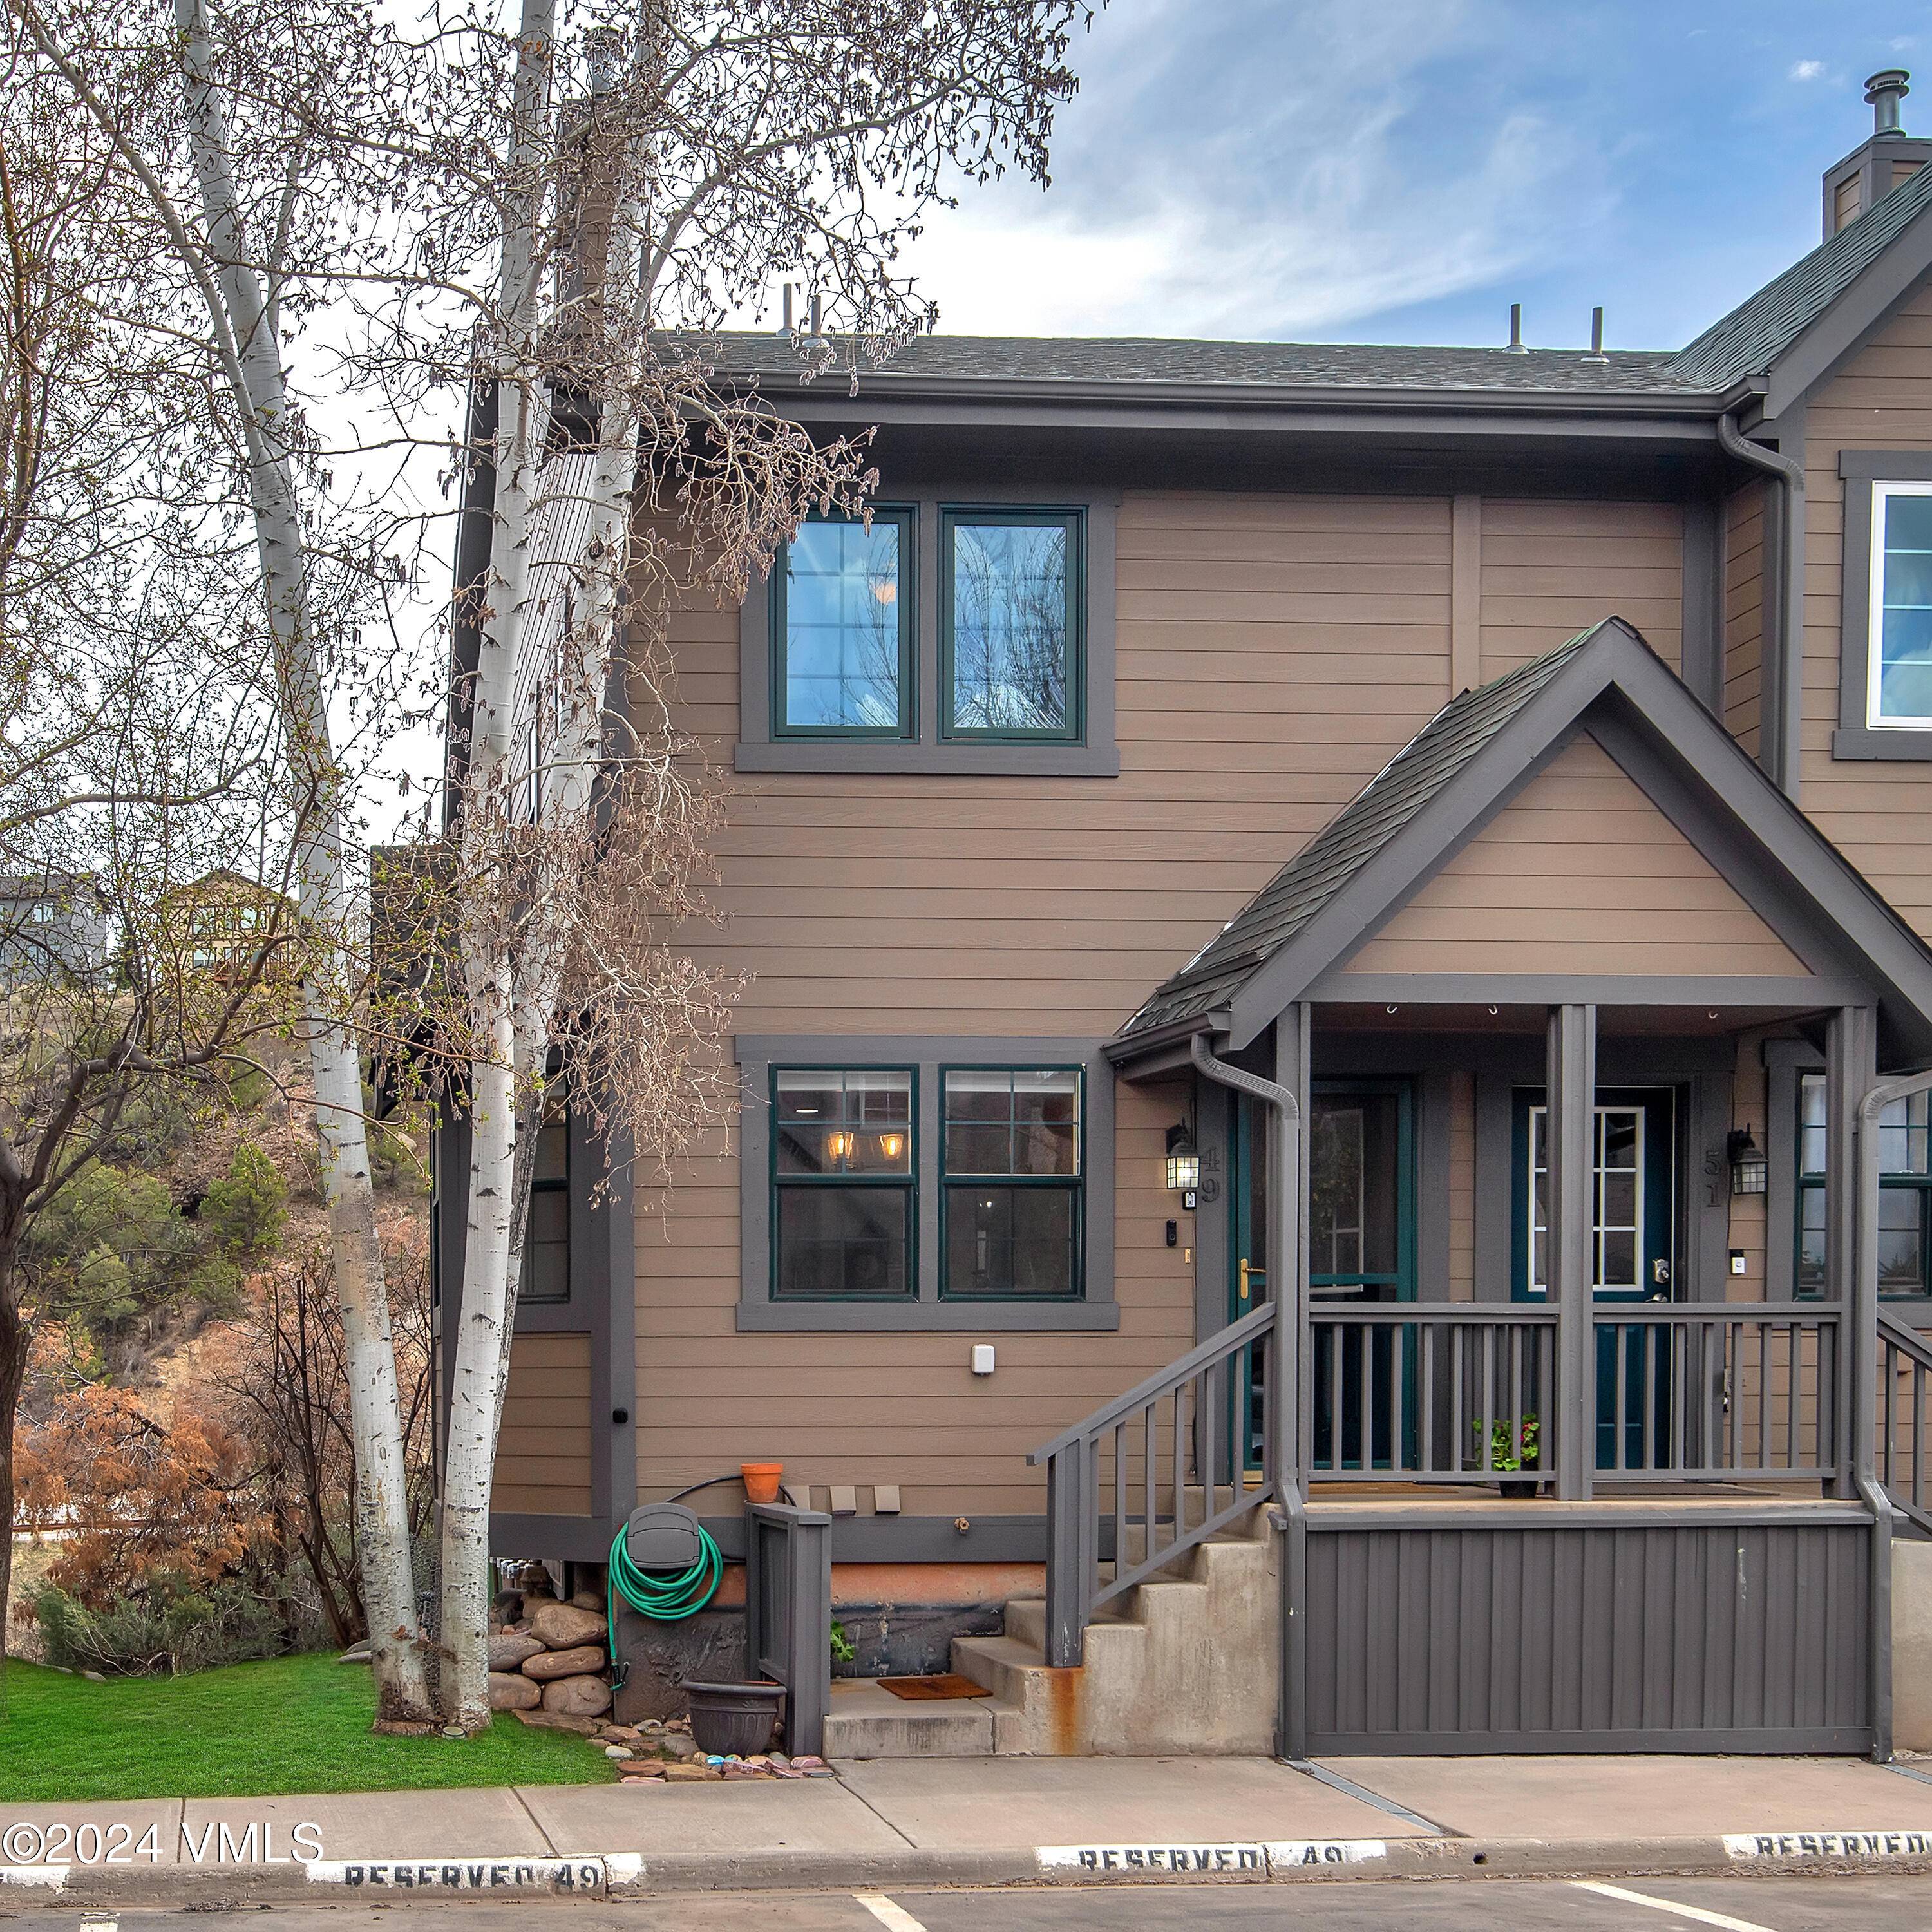 ON THE EAGLE RIVER ! ! ! Discover riverside living in this 3 bed, 3 bath townhome in Eagle Colorado.